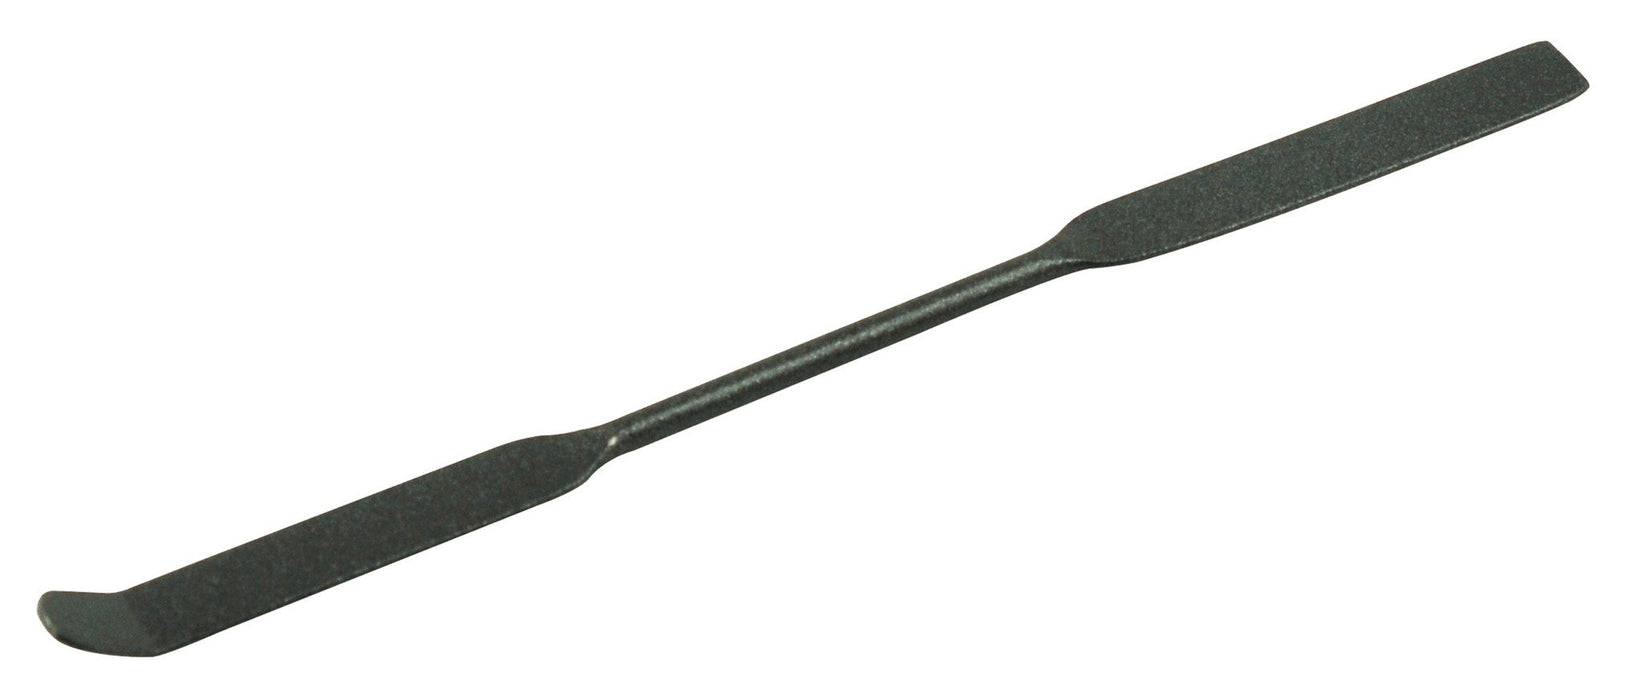 Spatula, 7.9 Inch - Teflon Coated Stainless Steel